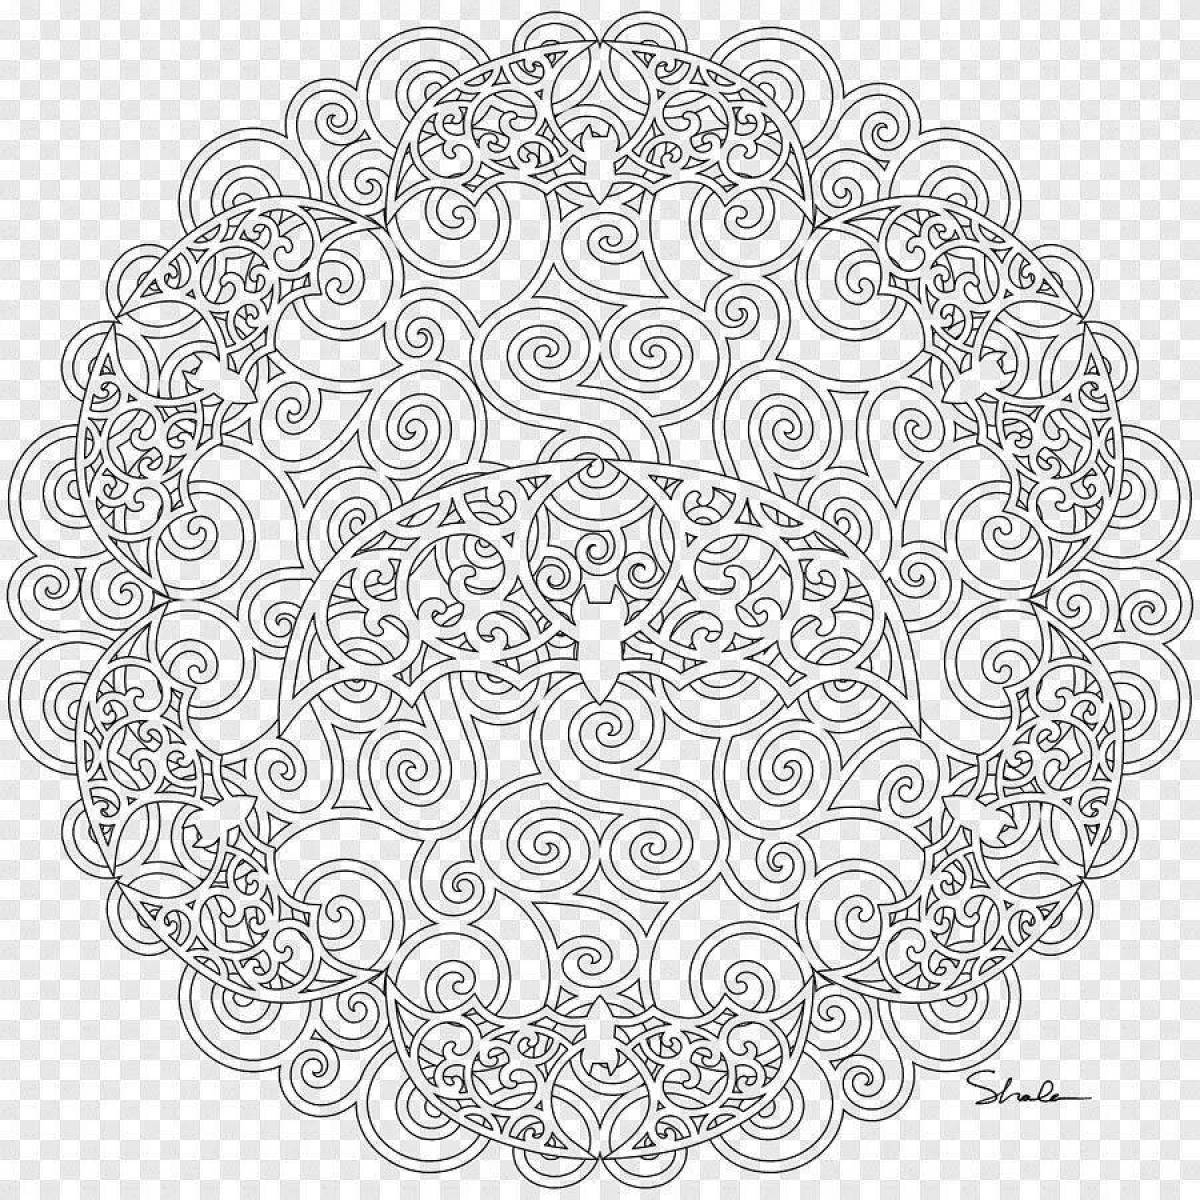 Colored doilies for coloring pages for babies